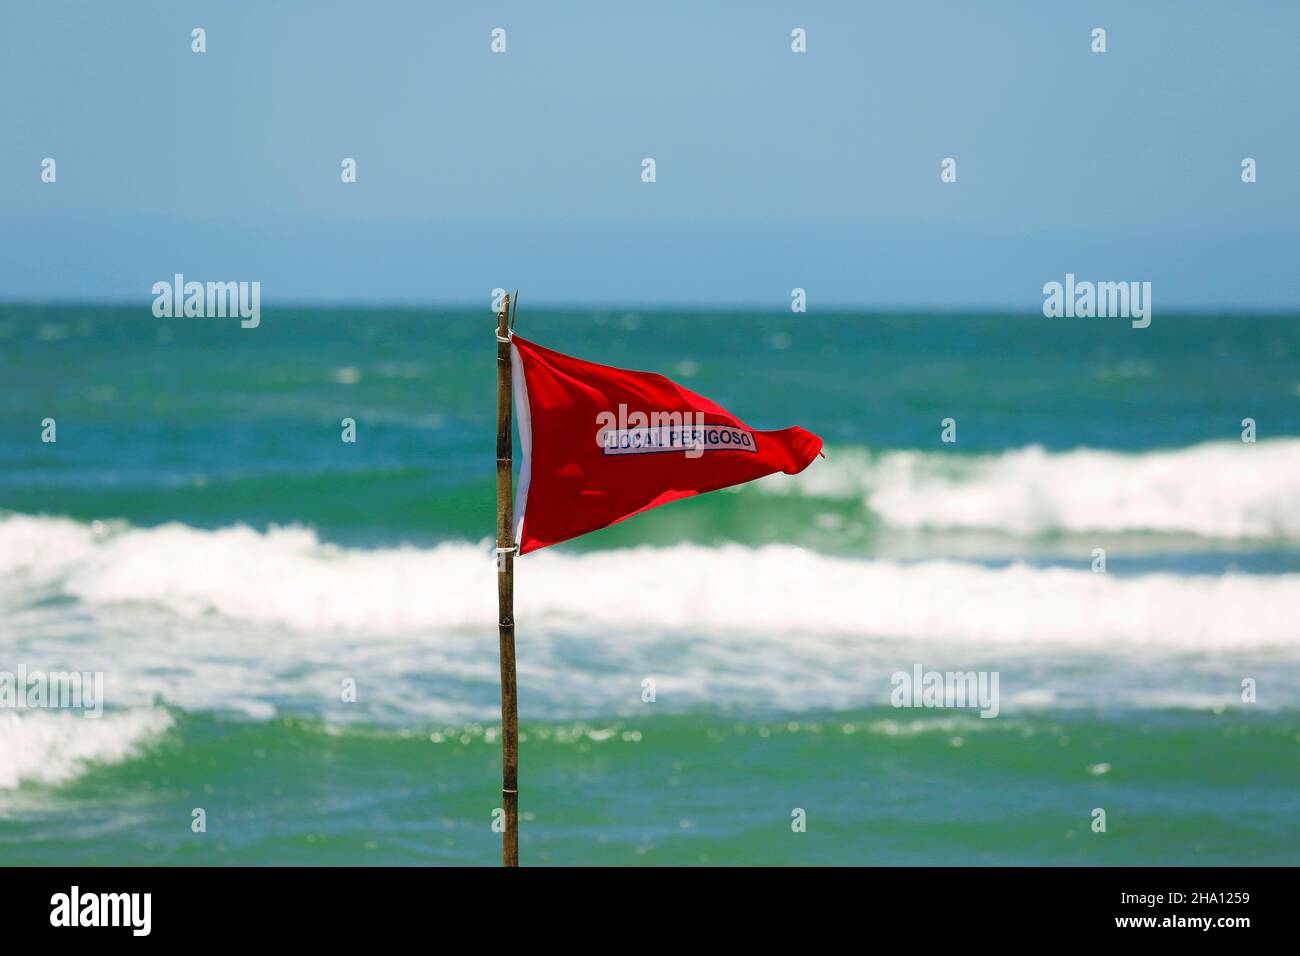 Red flag life guard danger warning sign on the beach. No swimming it's forbidden symbol, dangerous rip tide currents on water, enter at your on risk. Stock Photo